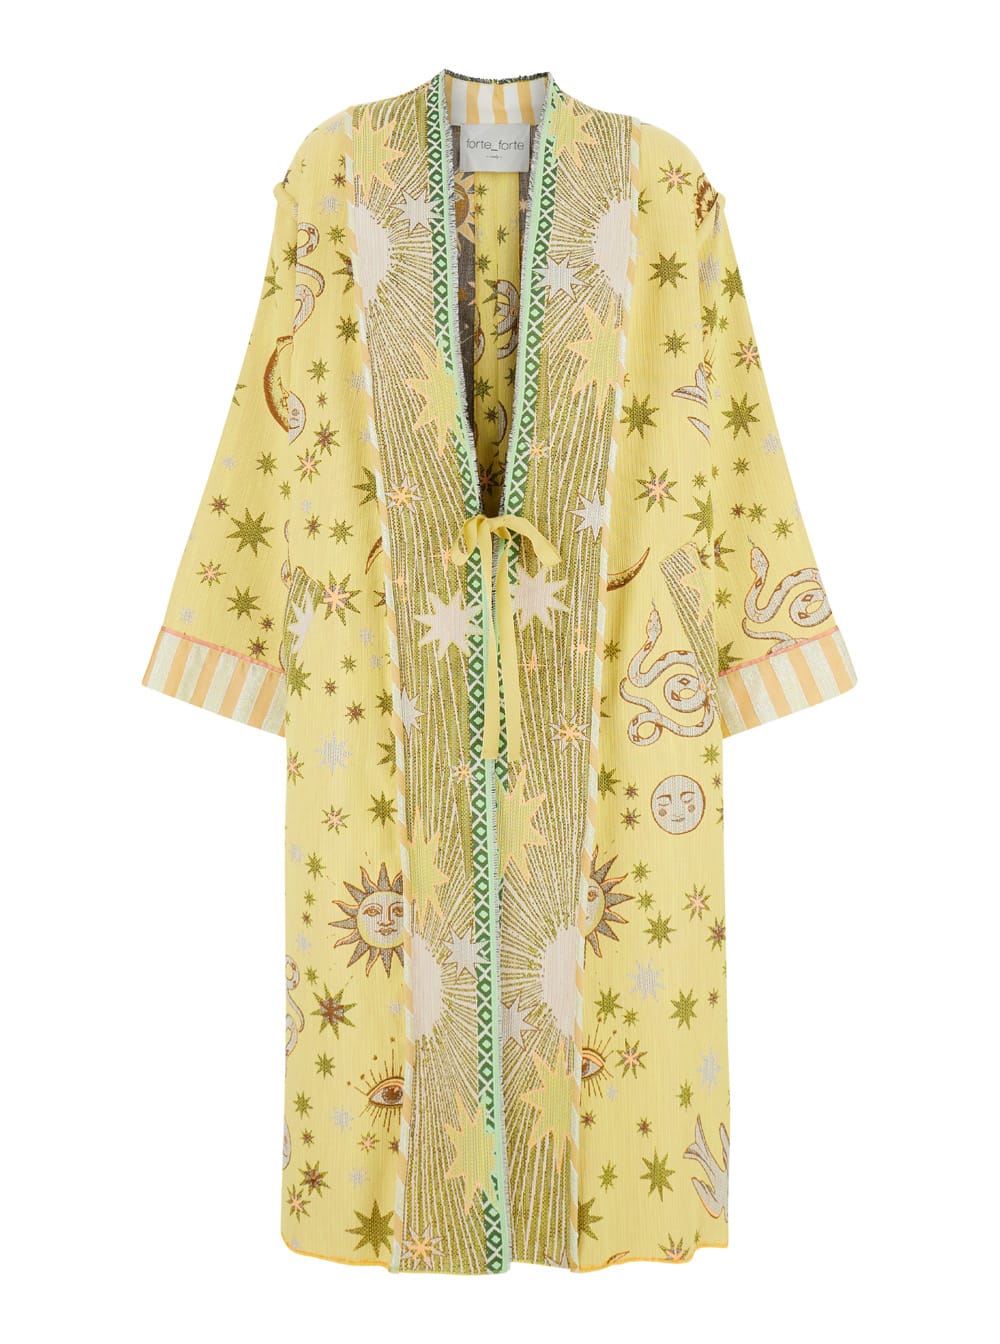 FORTE FORTE YELLOW ROBE COAT WITH SUN AND MOON EMBROIDERIES AND PRINT IN COTTON BLEND WOMAN